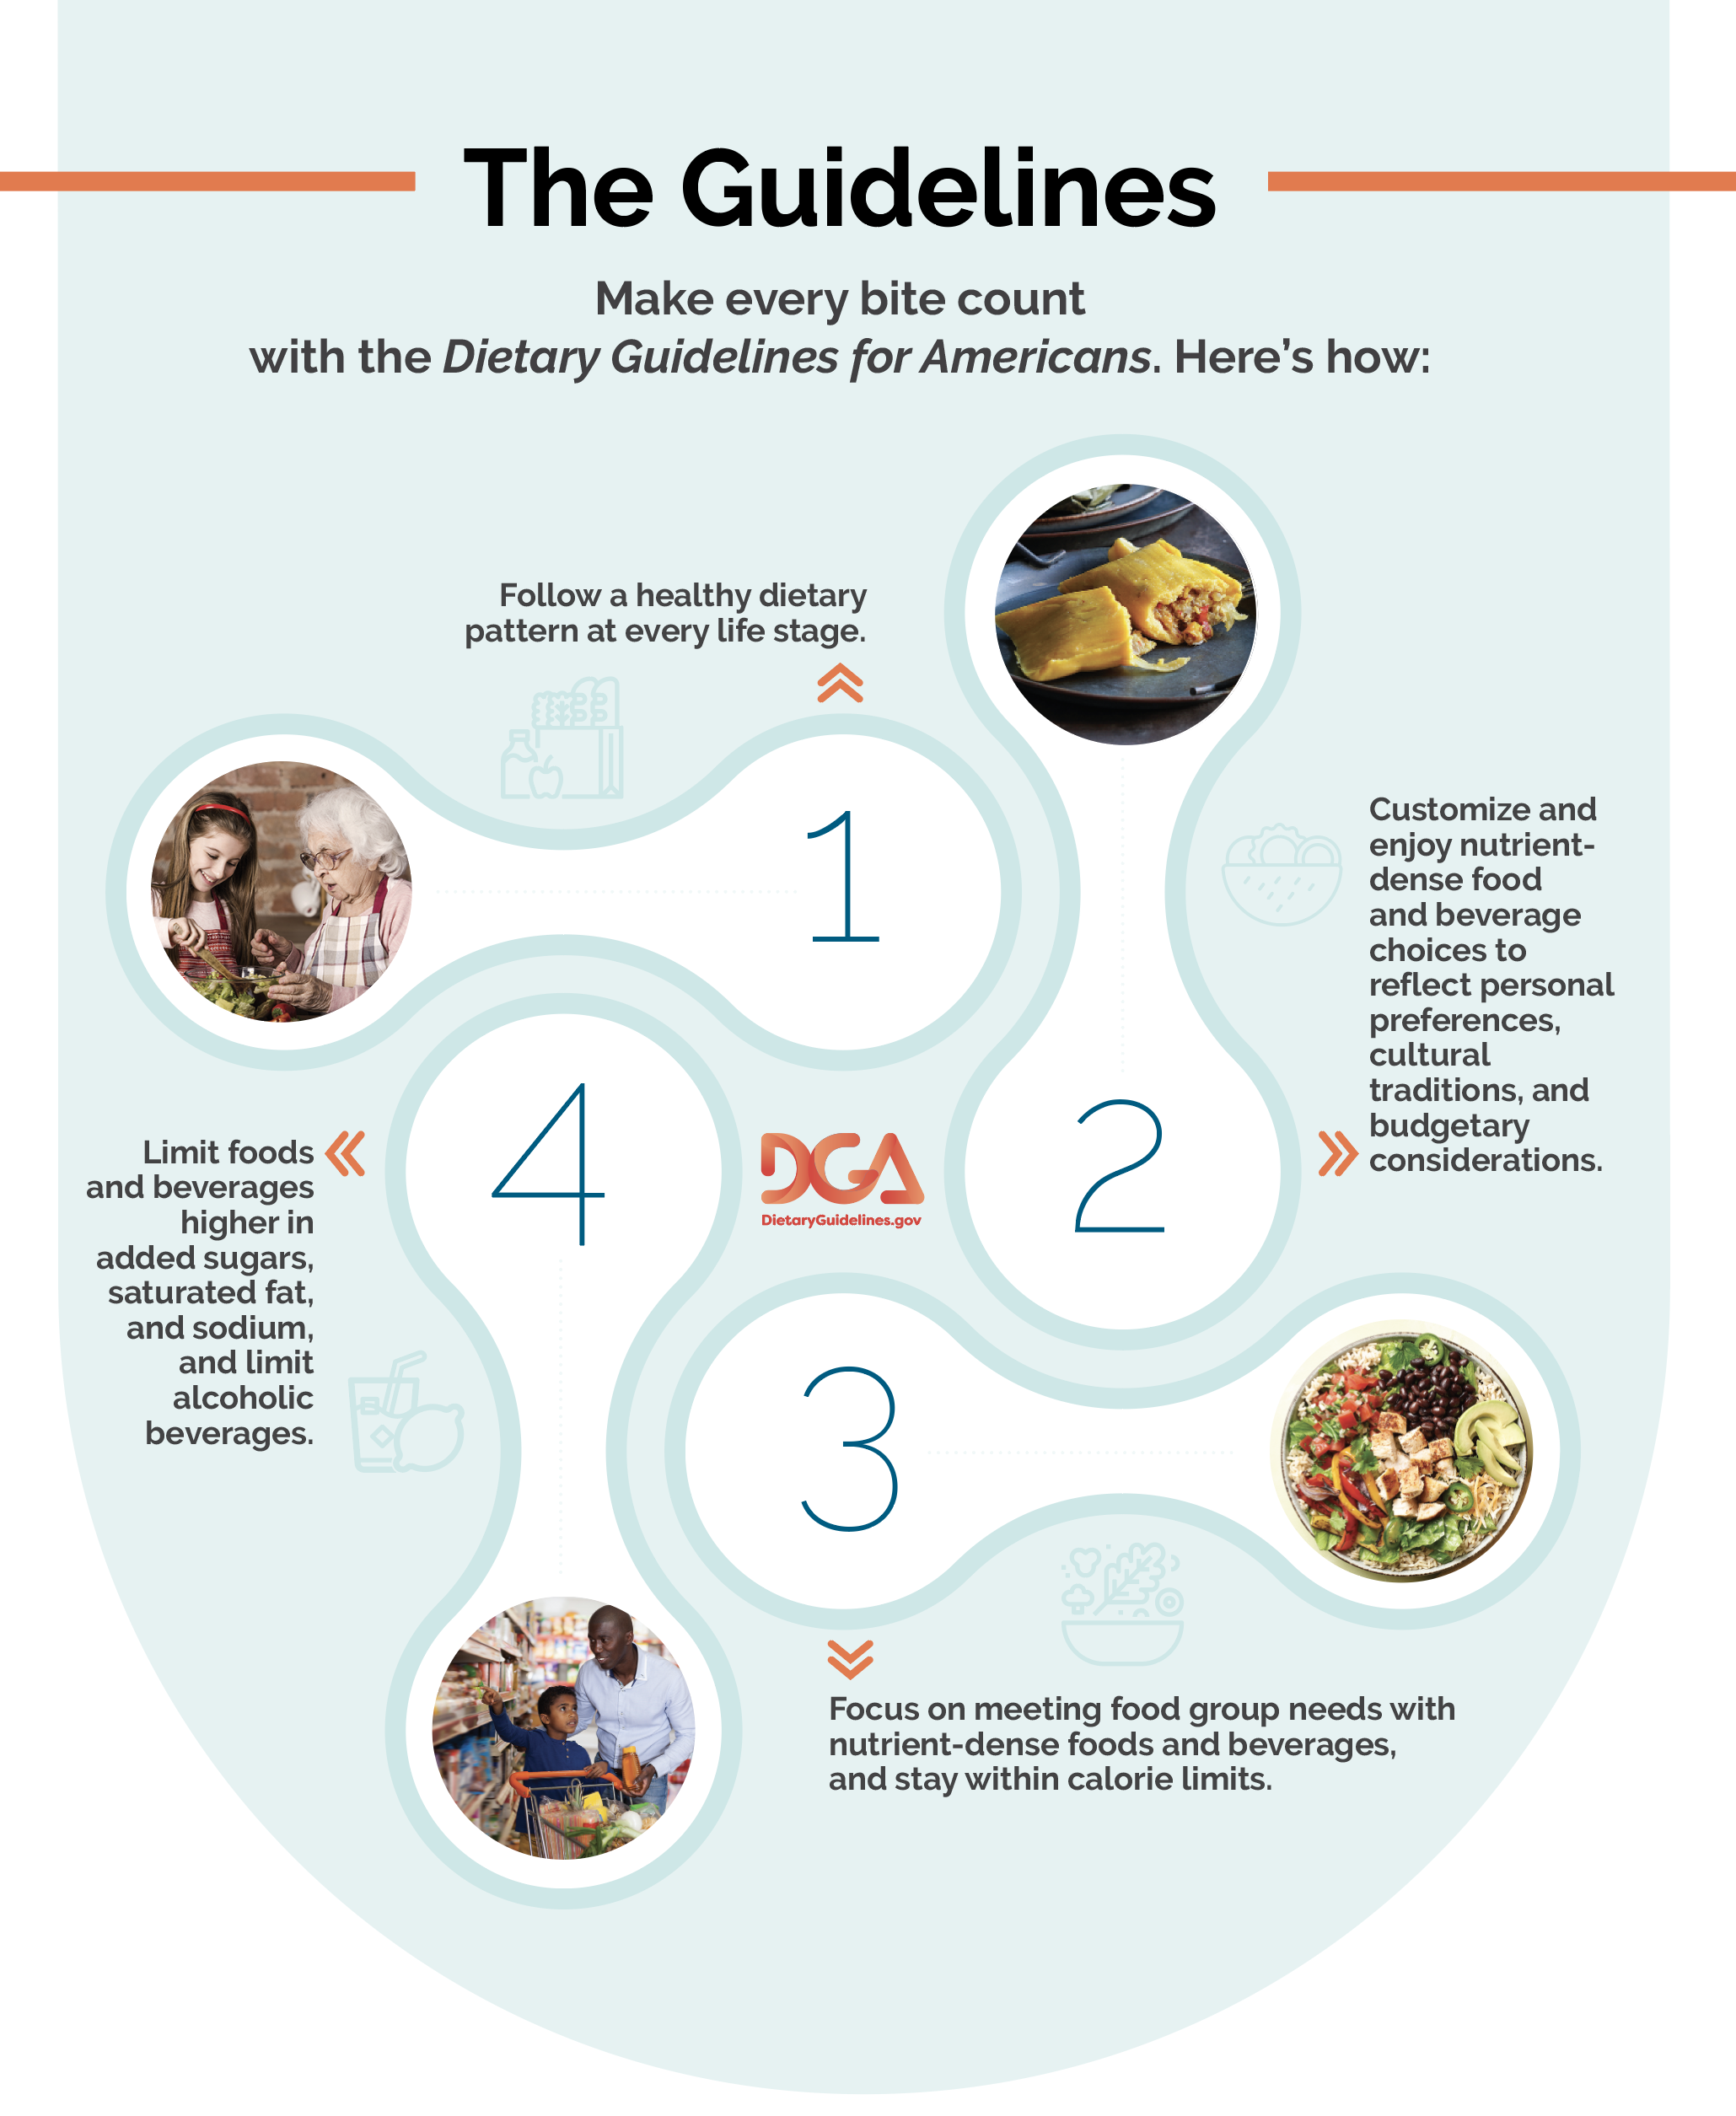 New Dietary Guidelines for Americans Released